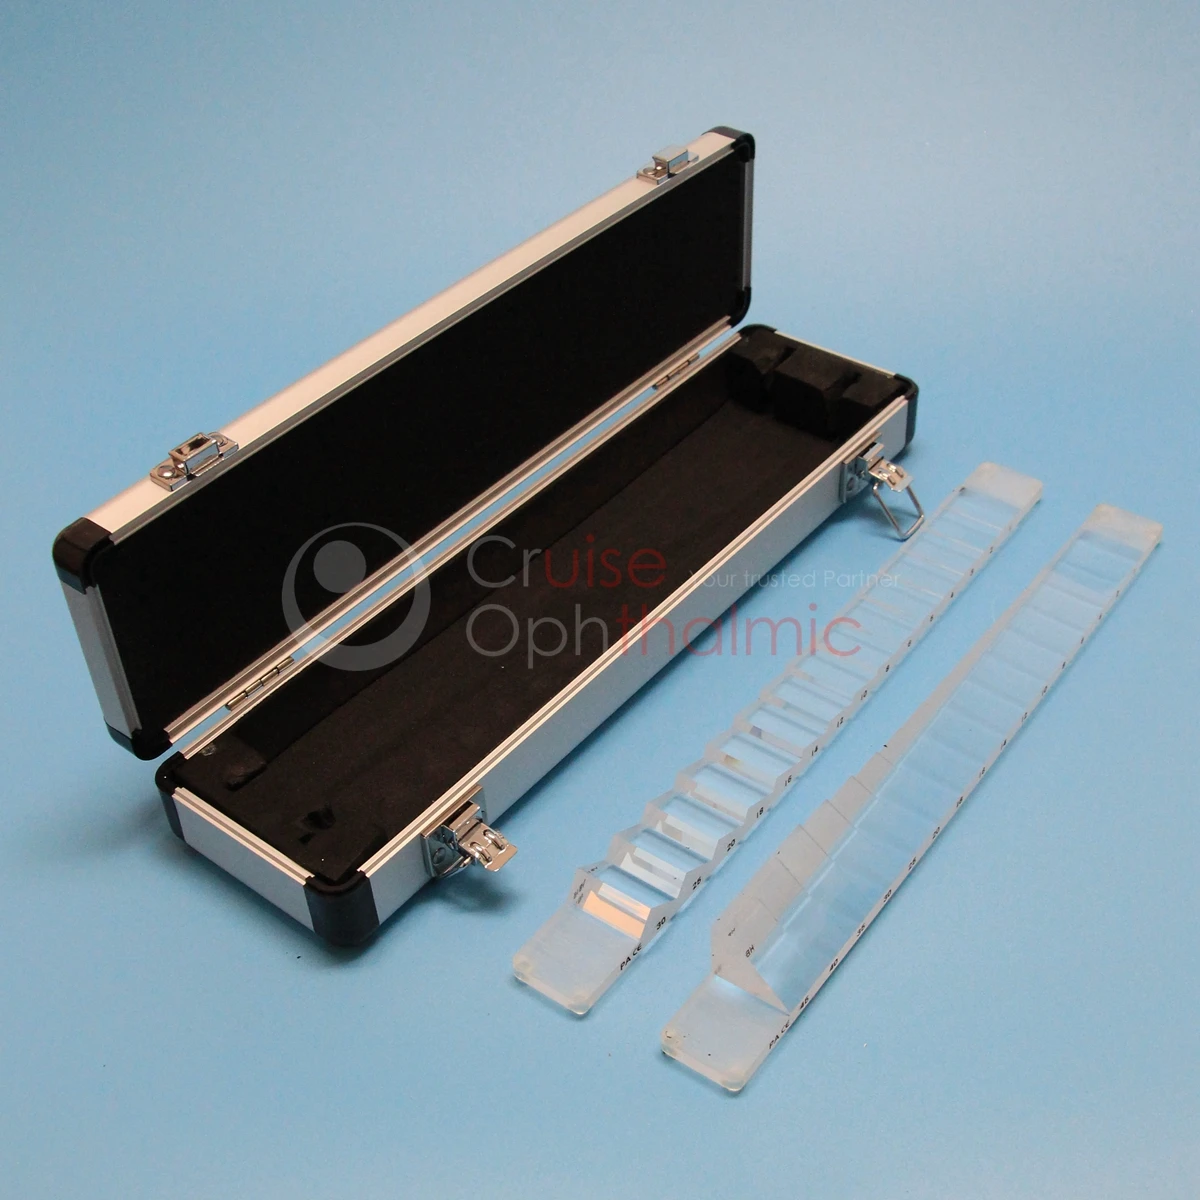 

Optometry Prism Bars Vertical and Horizontal Bar 31 Diopters | Aluminium Carrying Case | PB31 Ship From Poland